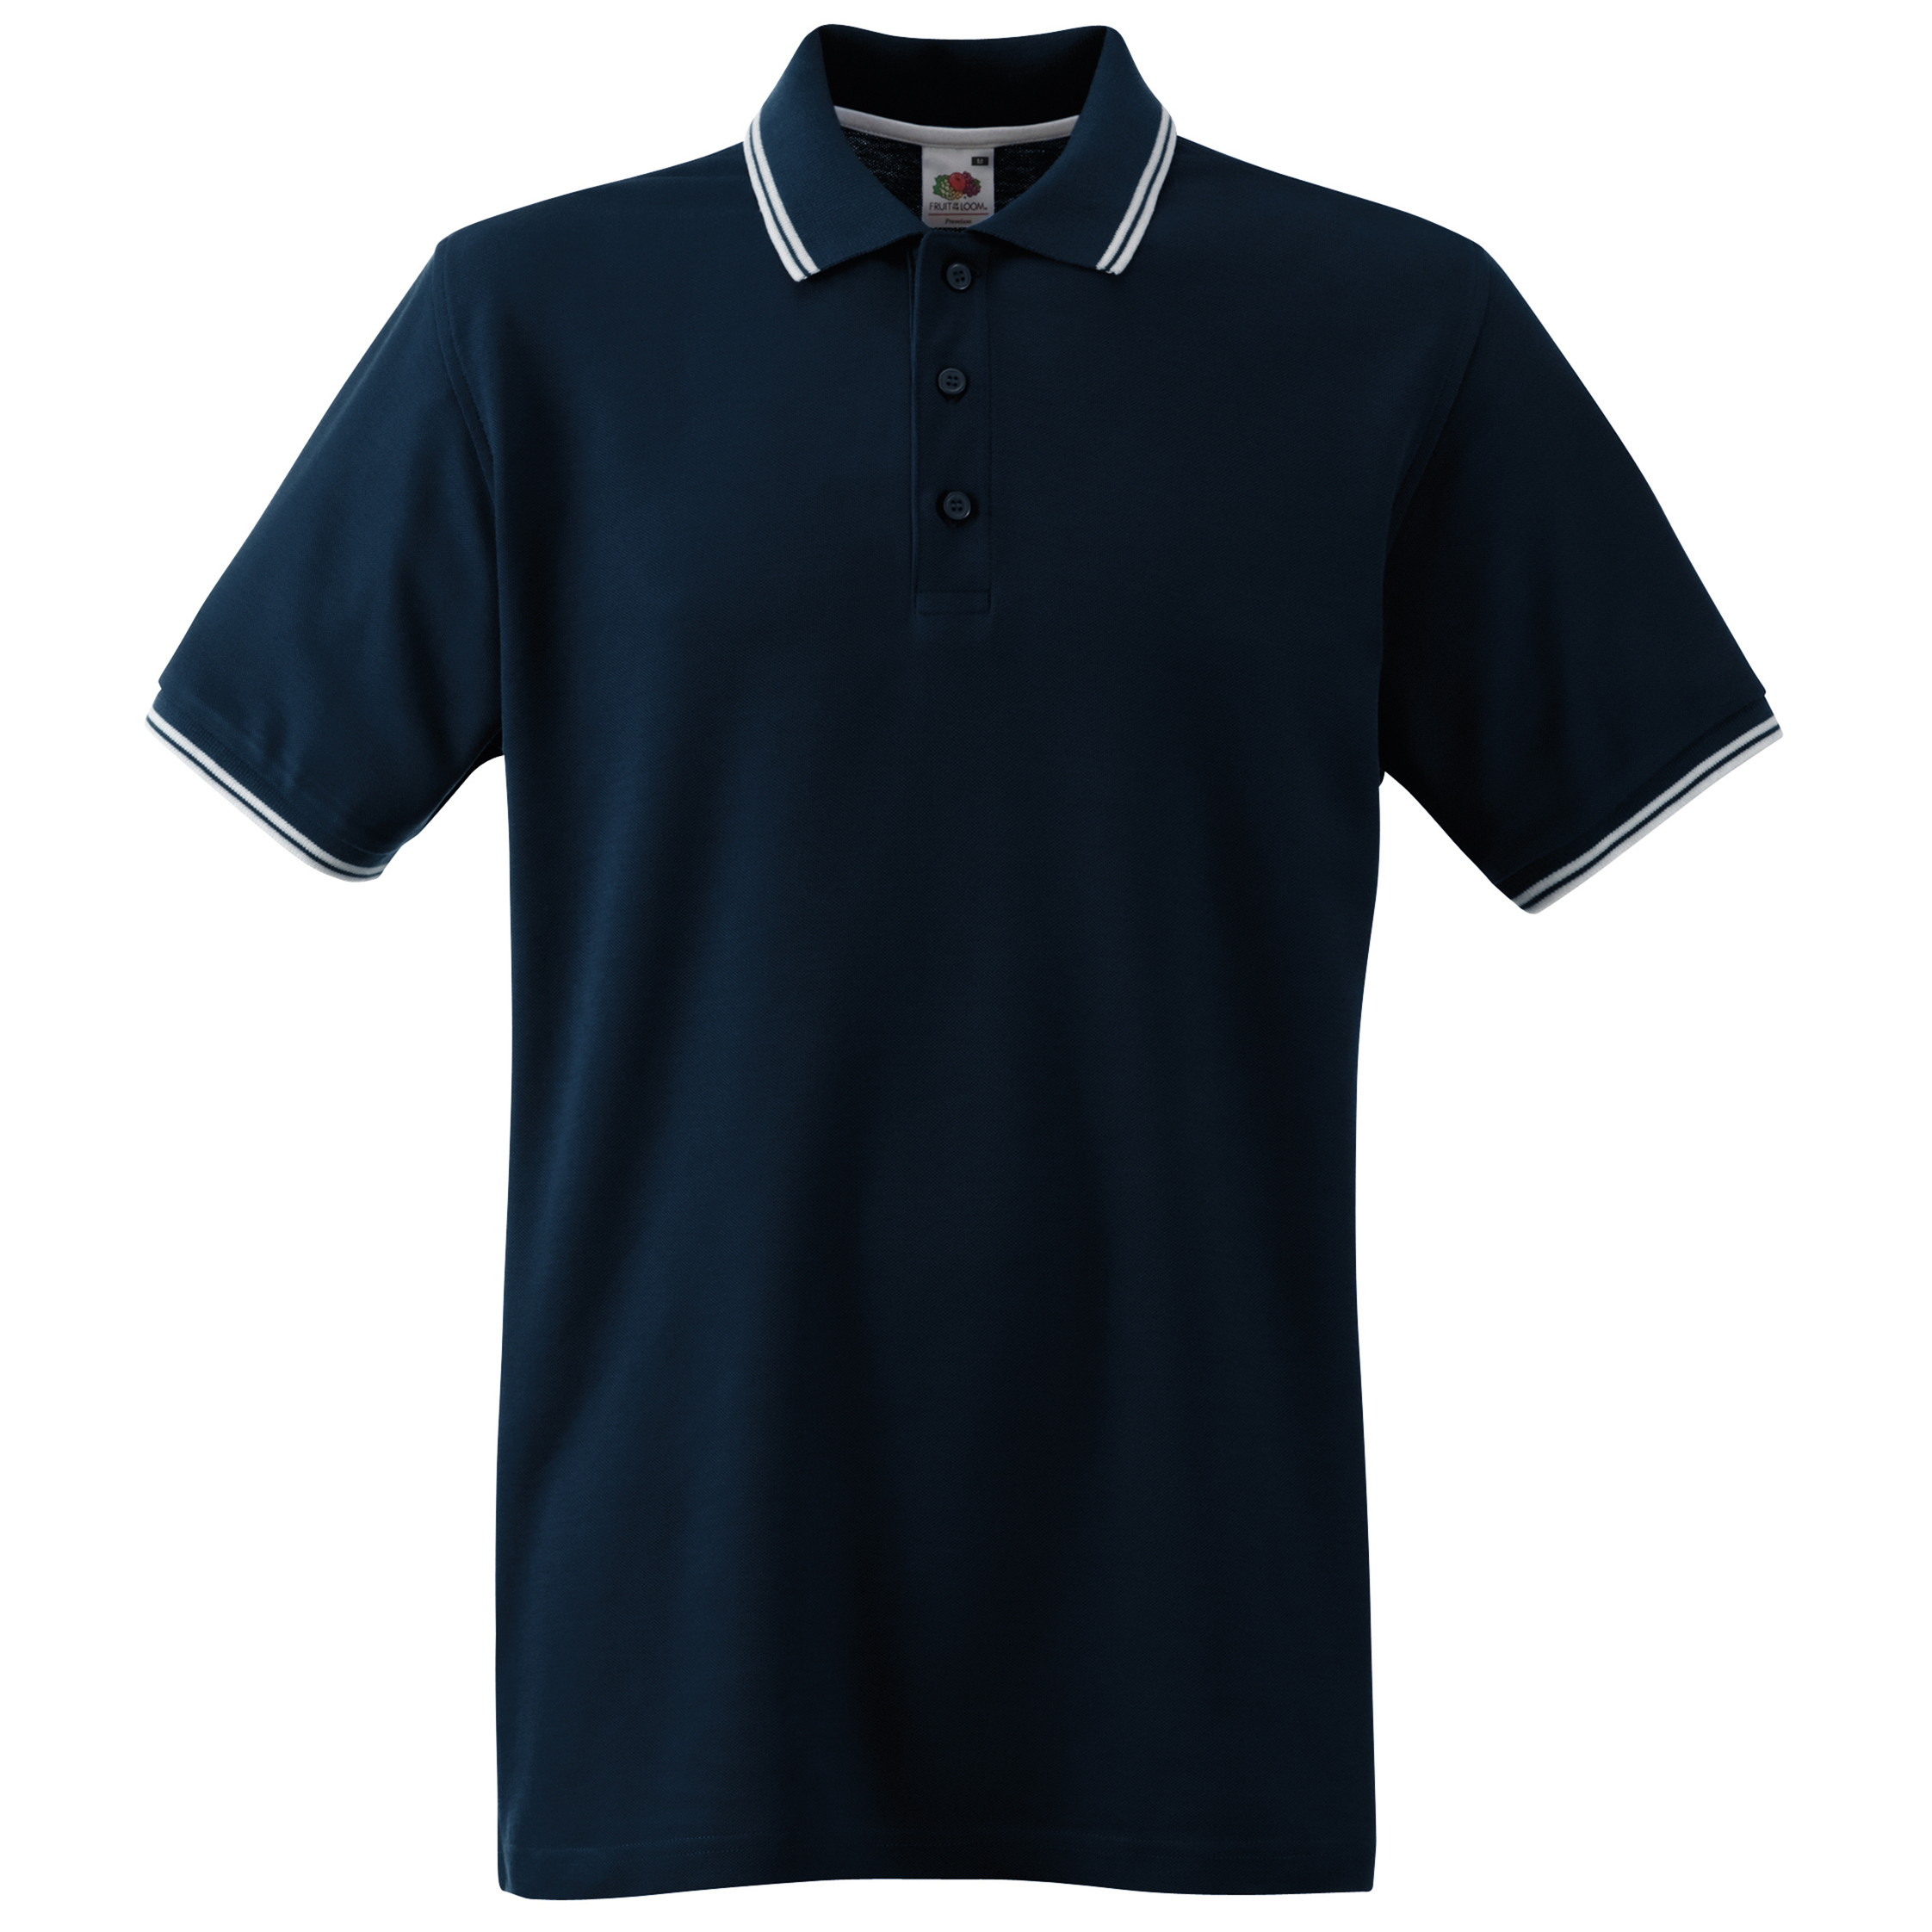 ax-httpswebsystems.s3.amazonaws.comtmp_for_downloadtipped-polo-deep-navy-white.jpg